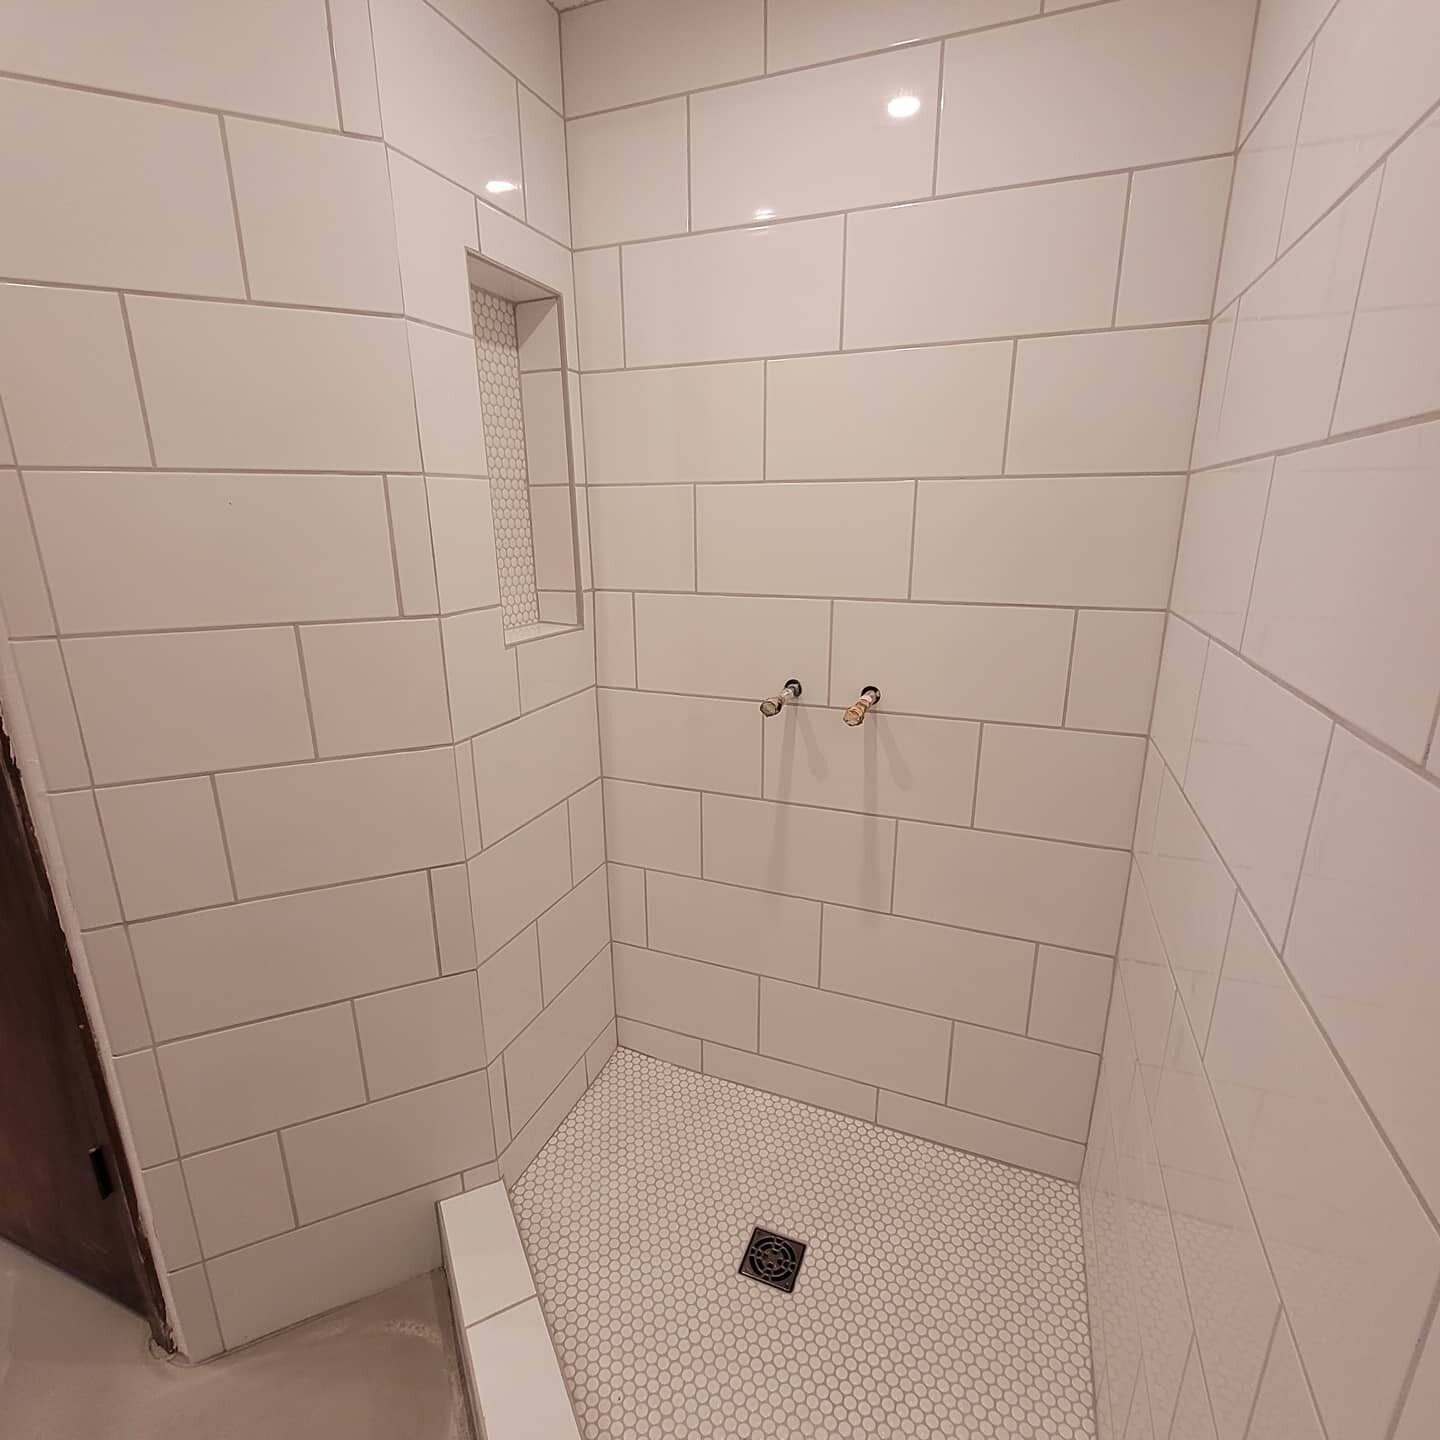 This week's cubicle
Turning the dark basement showerroom into a bright, clean, classic. White always wears well! Spacers galore! Getting good practice at custom shower pans!

#grateful #subwaytile #pennytile #showertile #bathroomtile #fildi #customsh